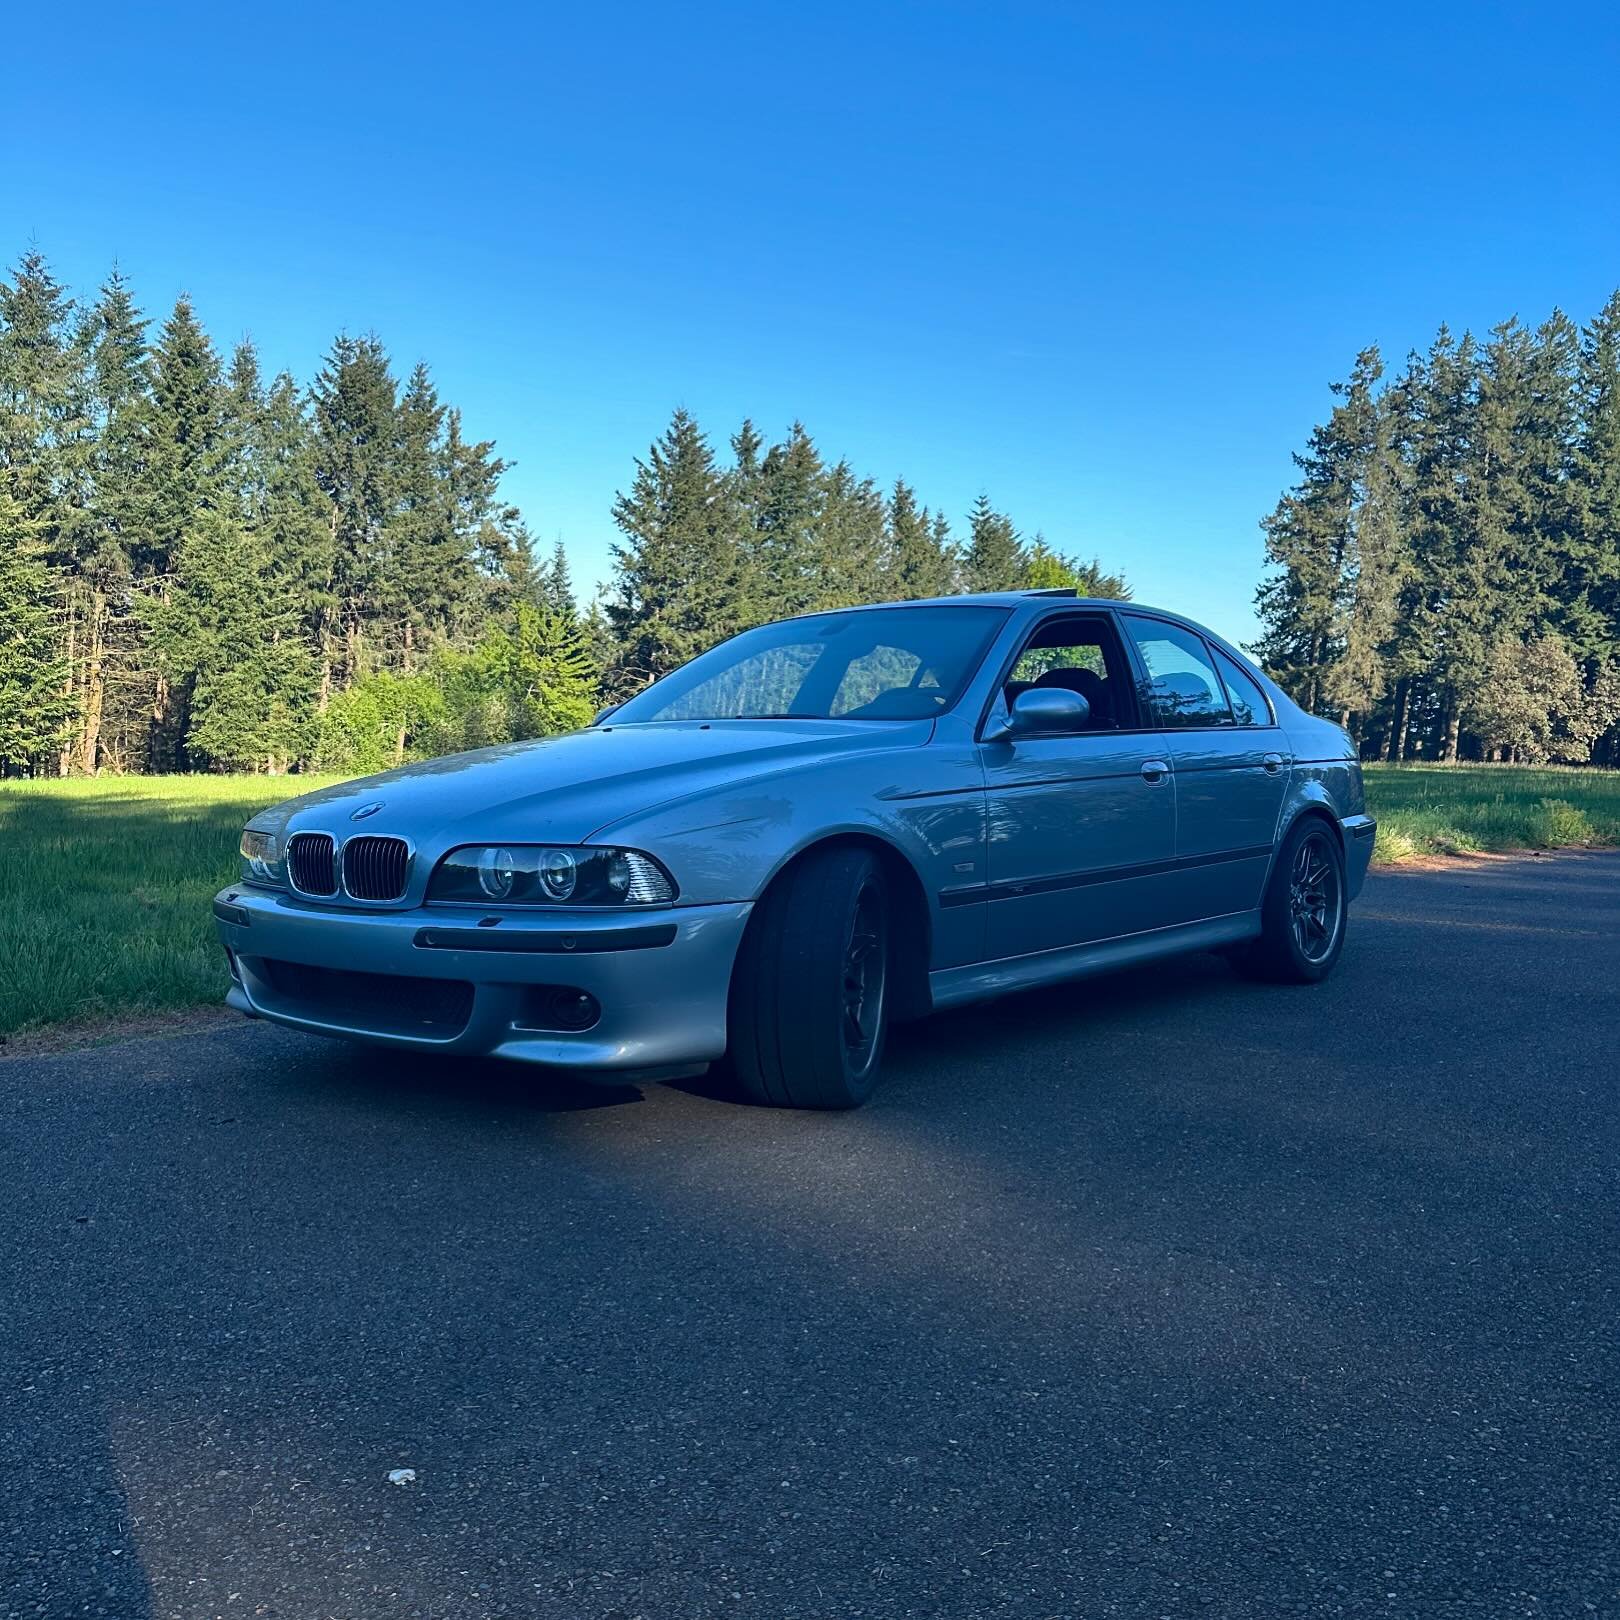 Got this old thing back together for one hell of a shakedown run this evening. Should be all set for some prerun work! #bmw #m5 #e39m5 #pnwblitz